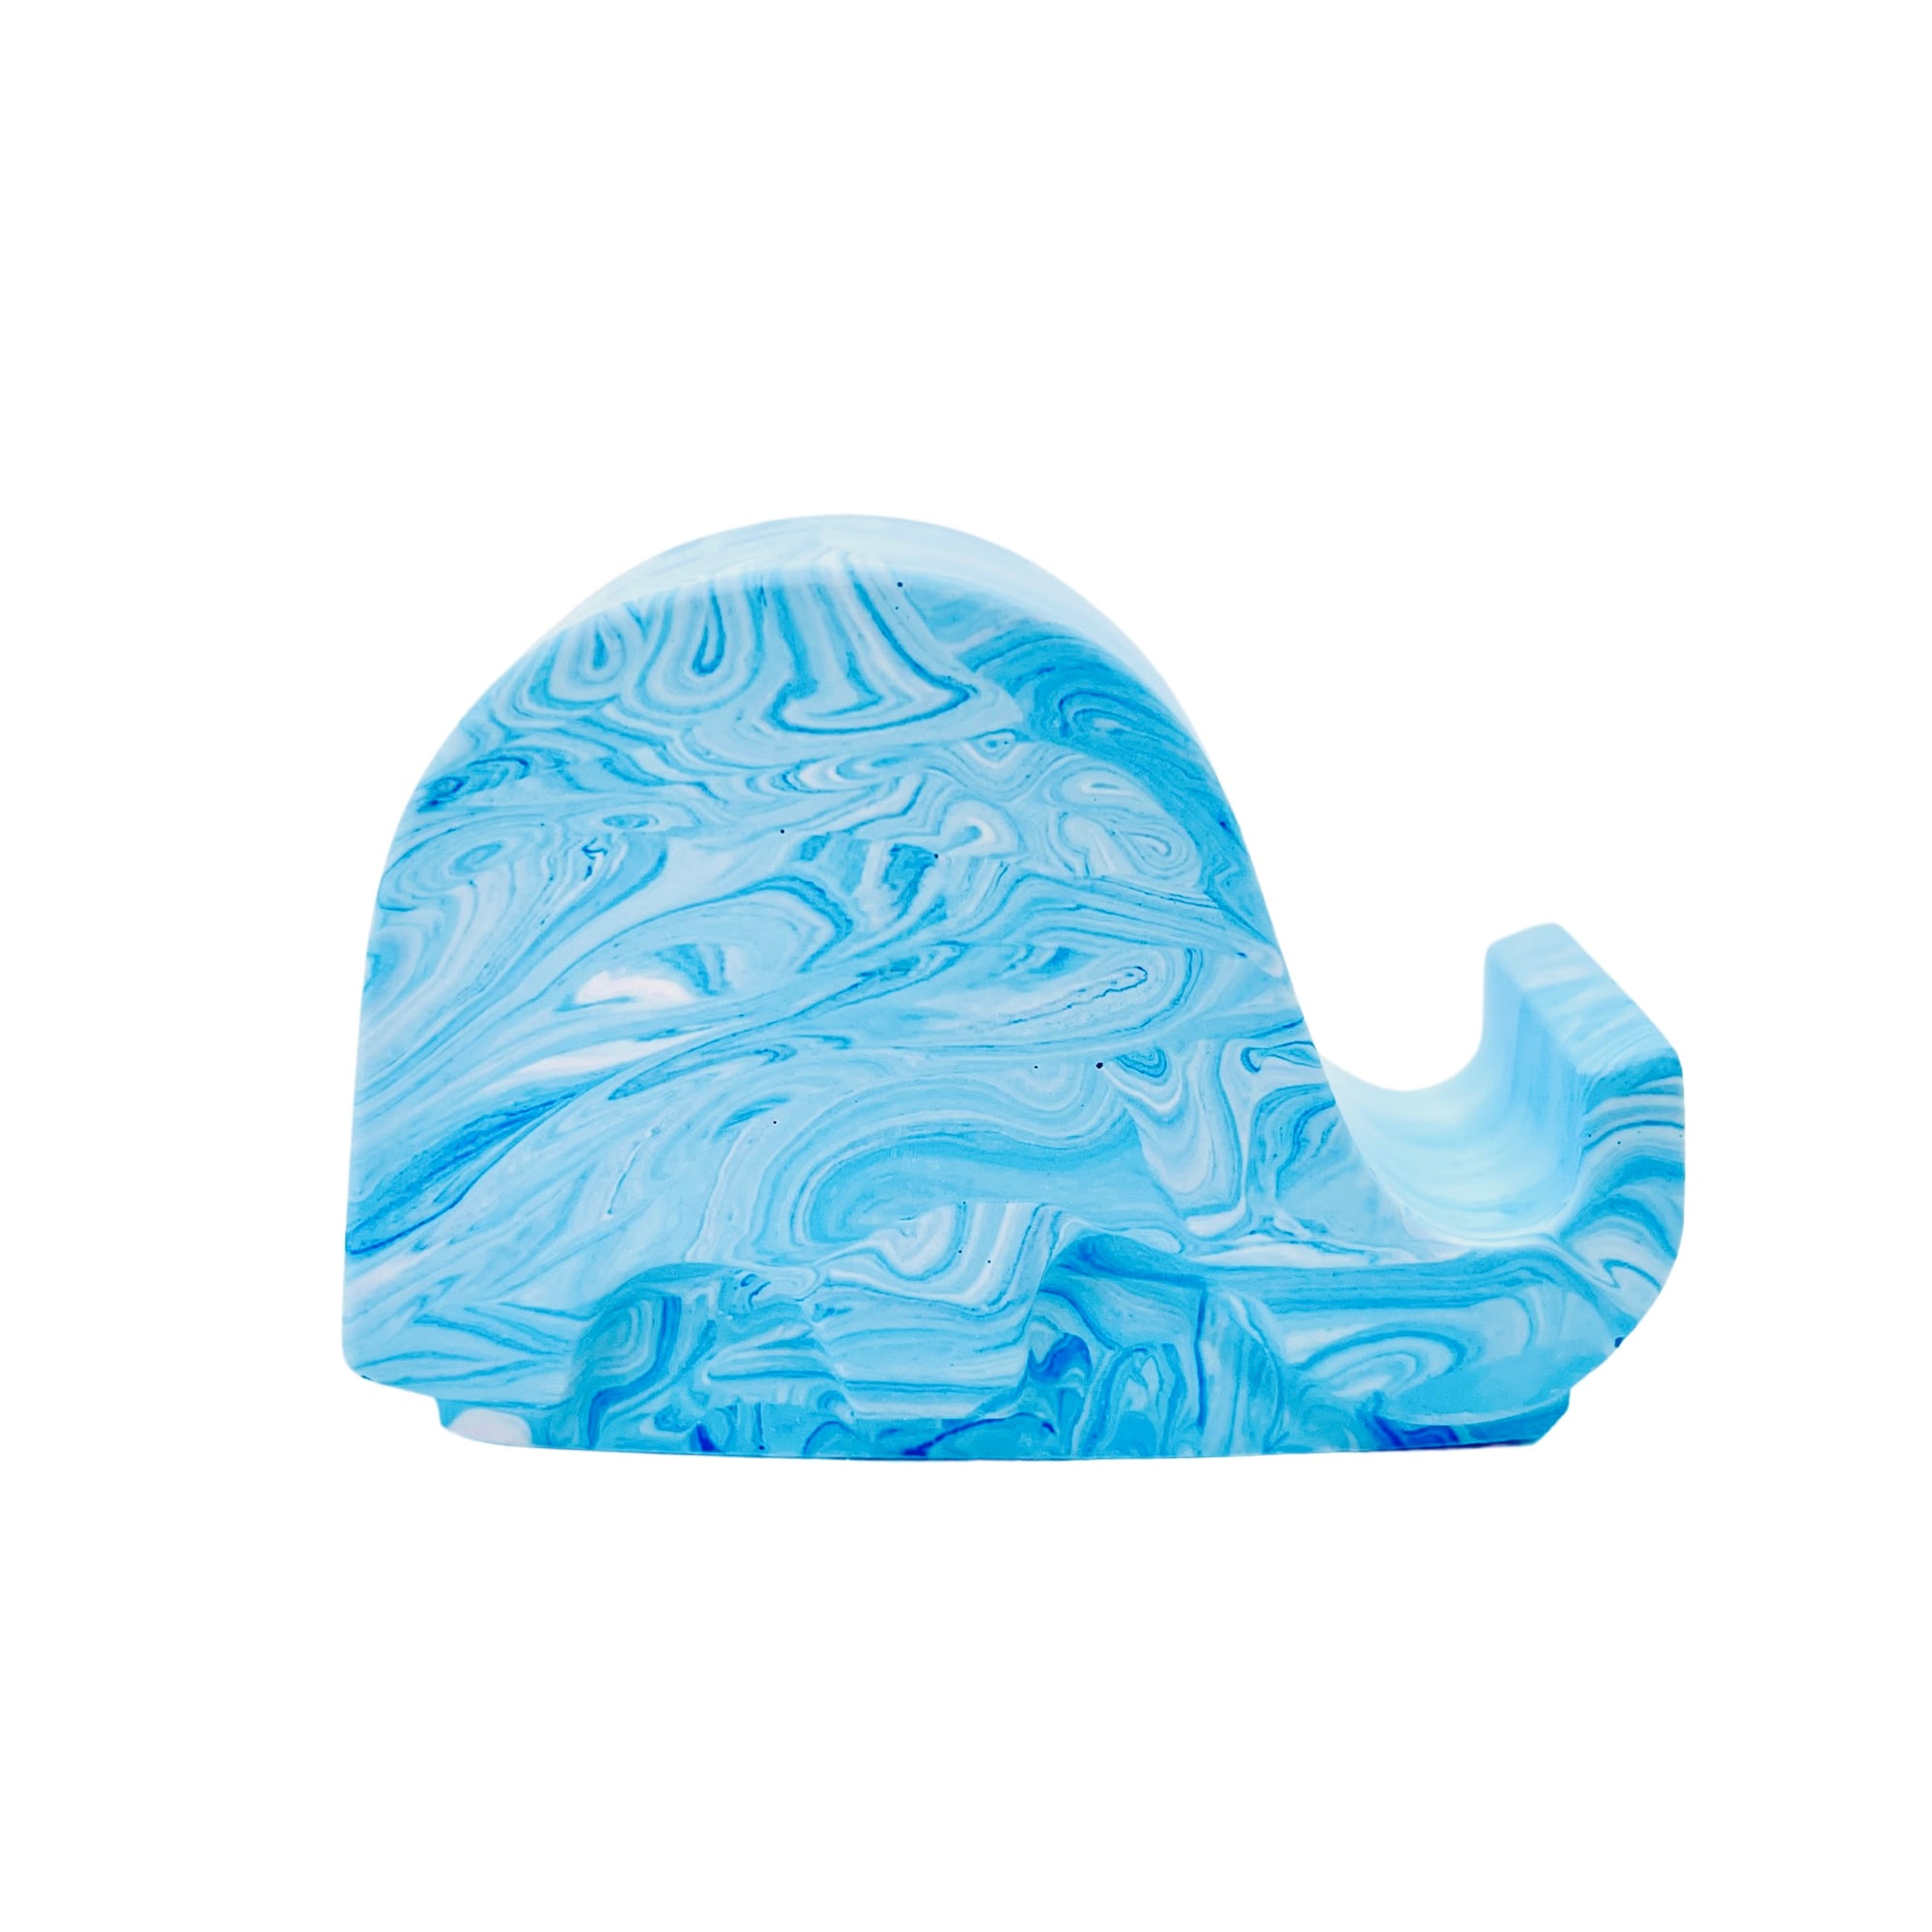 A Jesmonite elephant mobile phone stand measuring 6.5cm in length marbled with blue pigment.